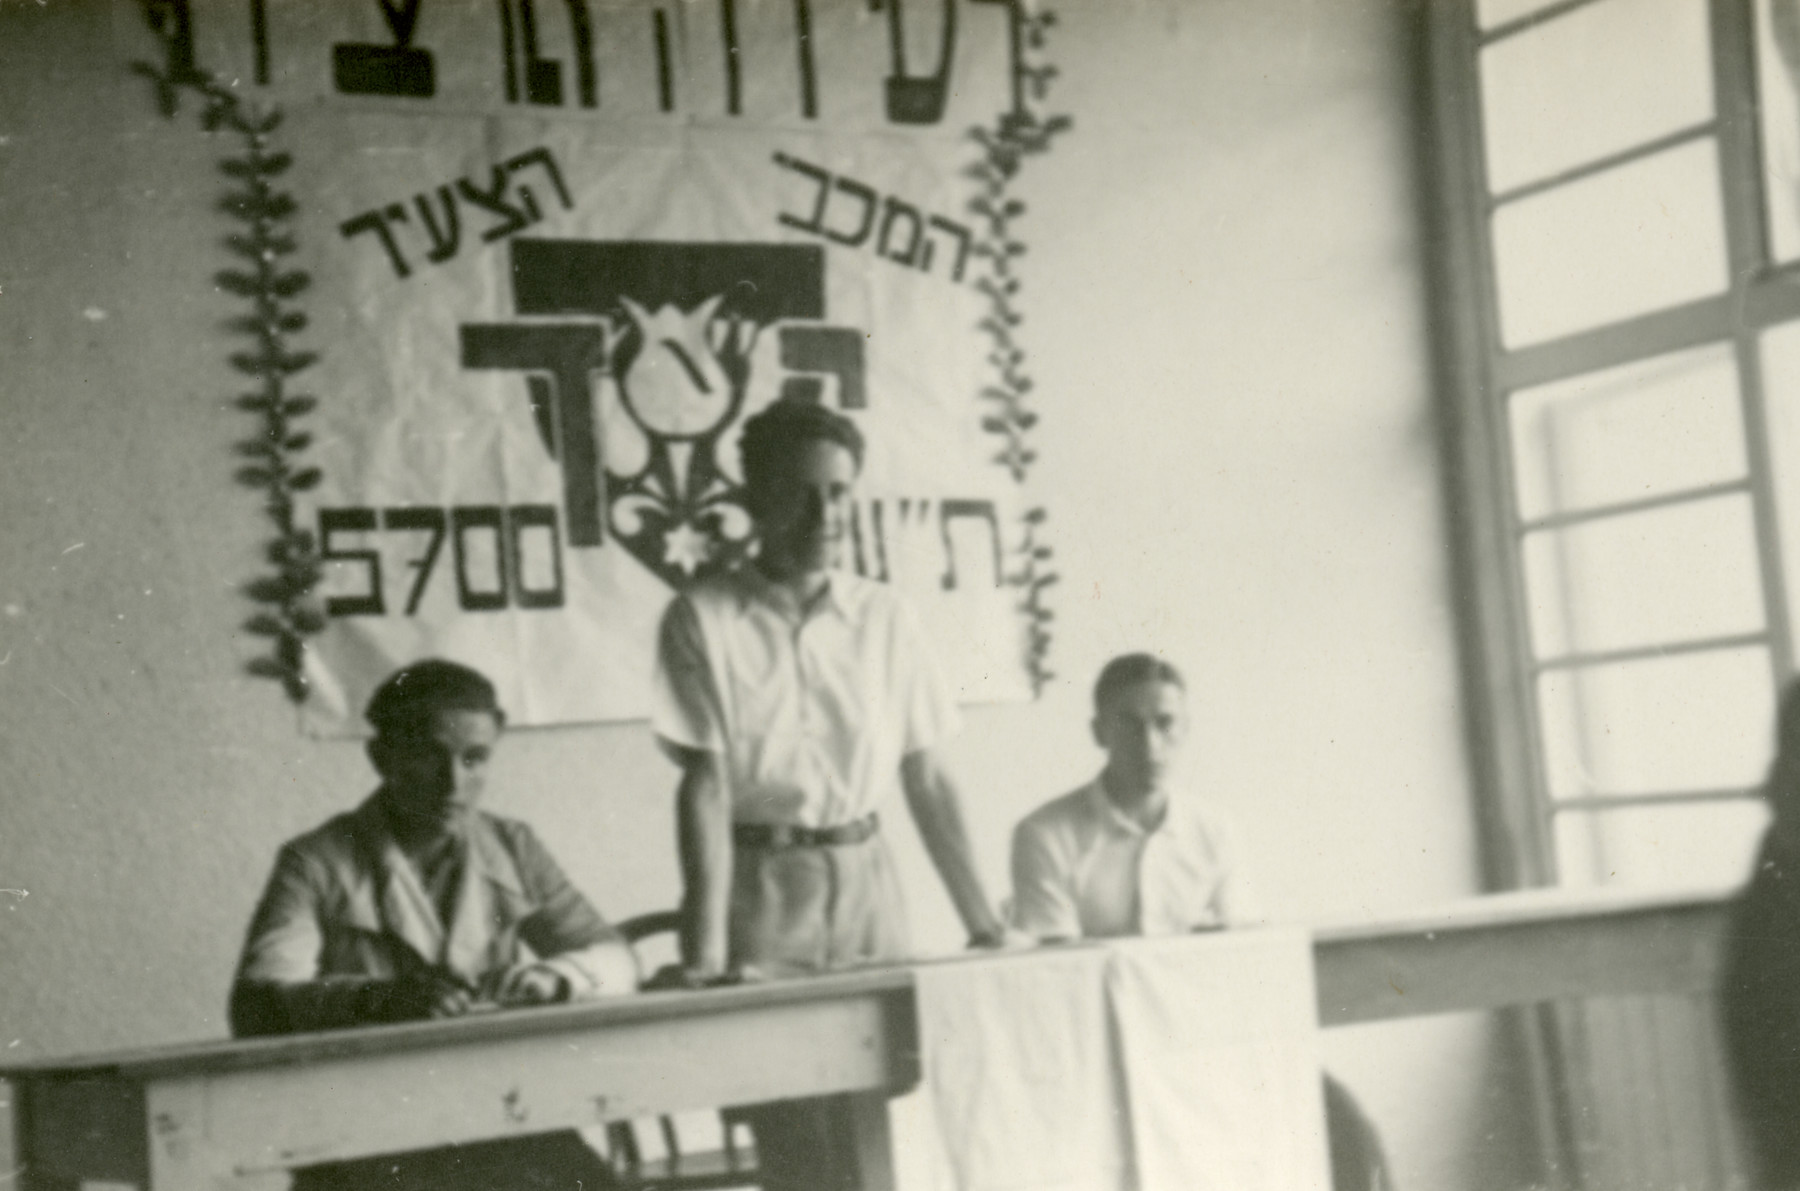 Leaders of the Maccabi team hold an opening ceremony in their summer camp in Czernohorske Kupele.

Pictured from left to right are Peretz Revesz, Eli Sajo and [possibly Josef Berger].